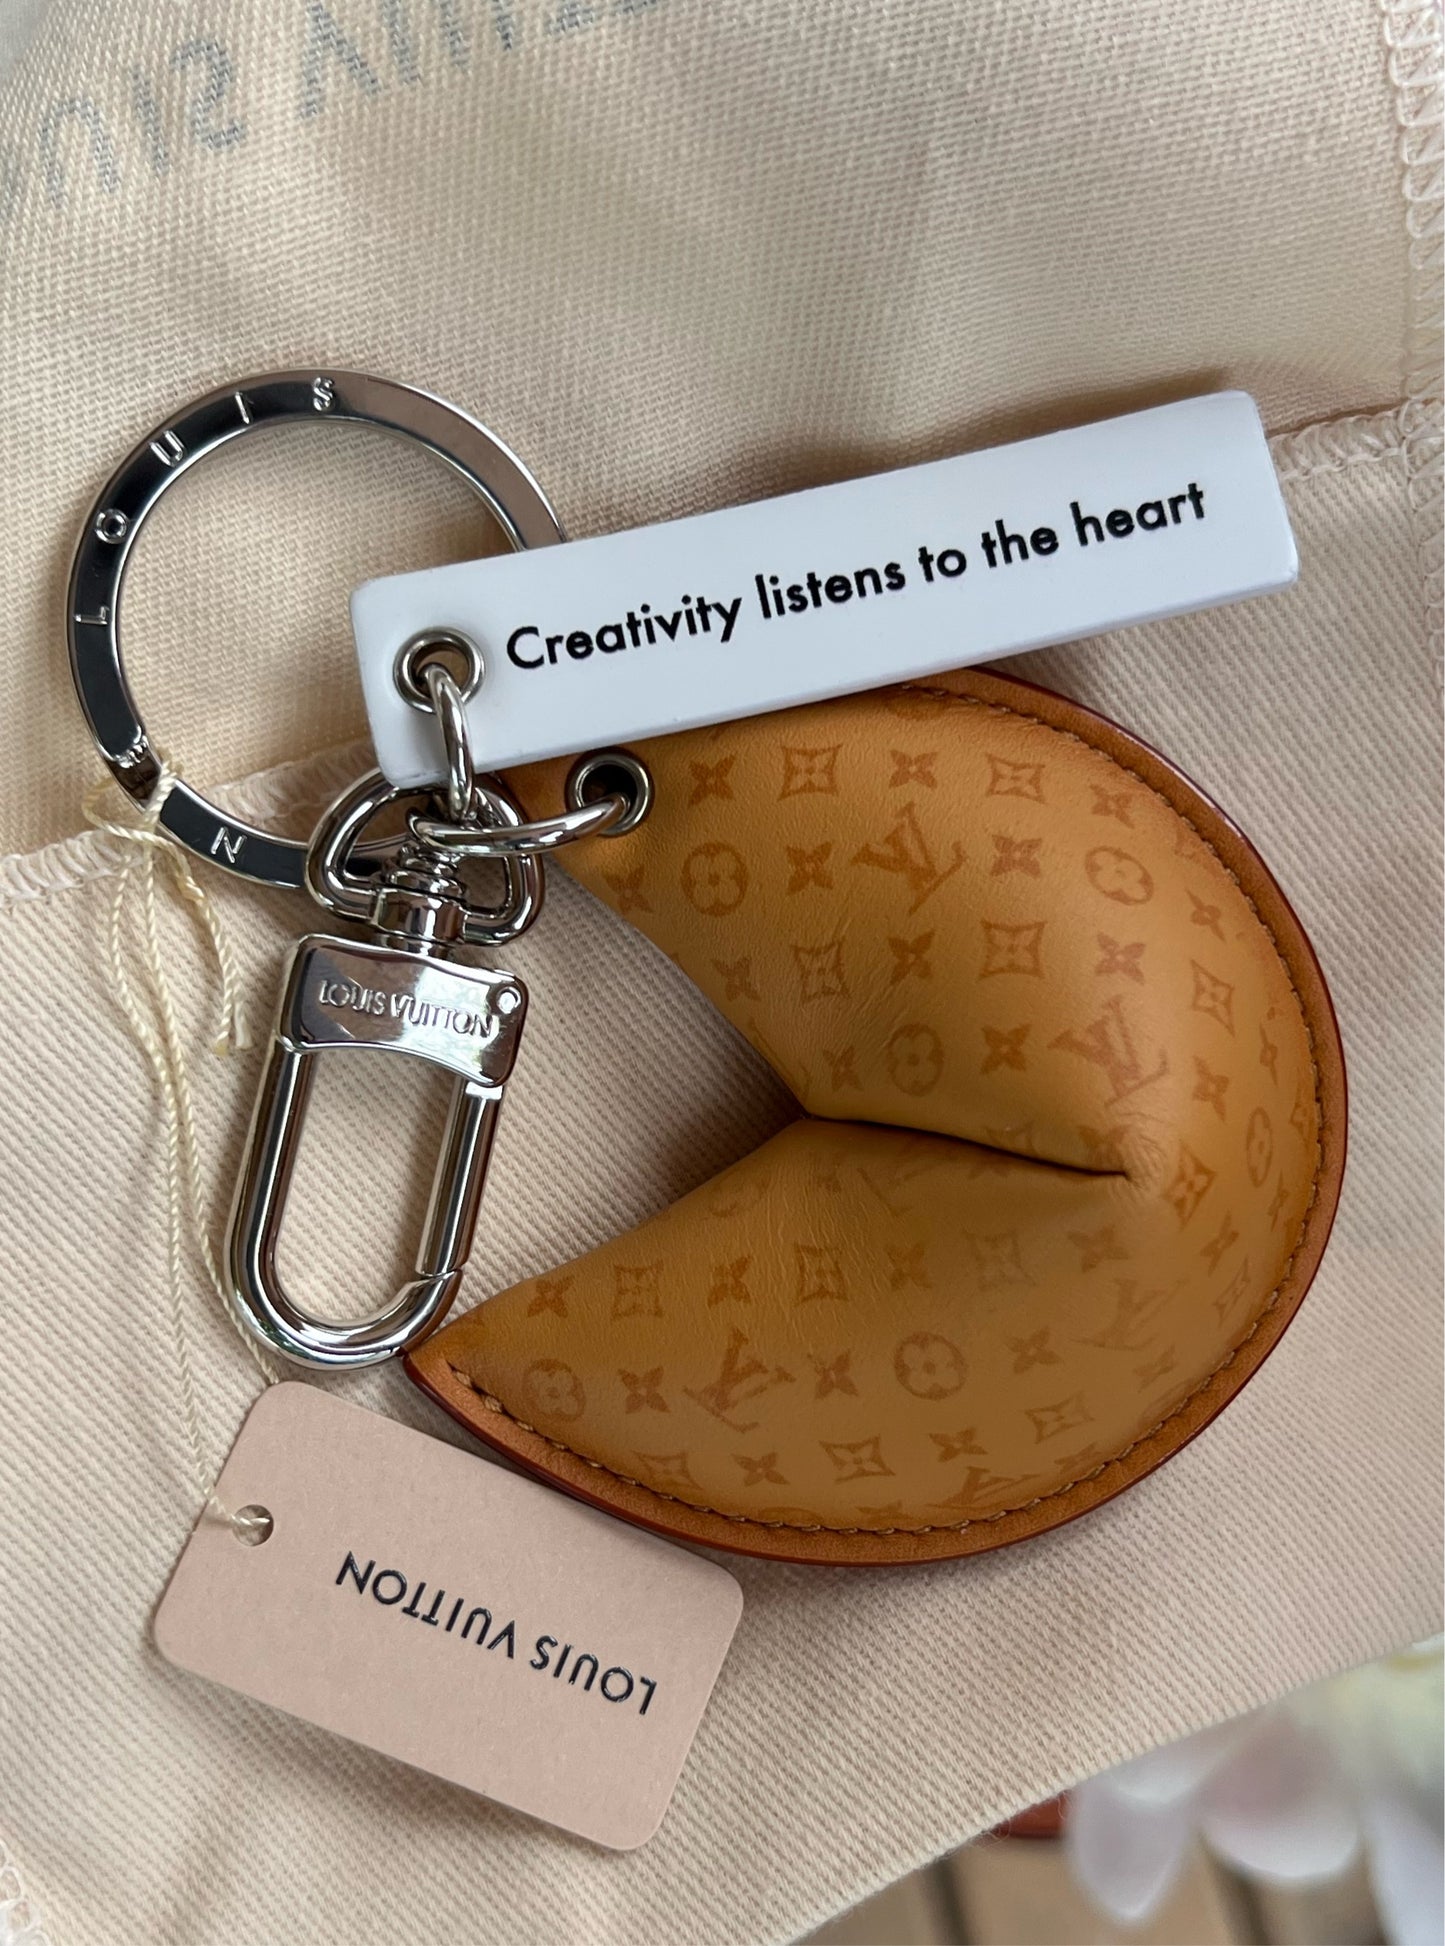 lv fortune cookie bag